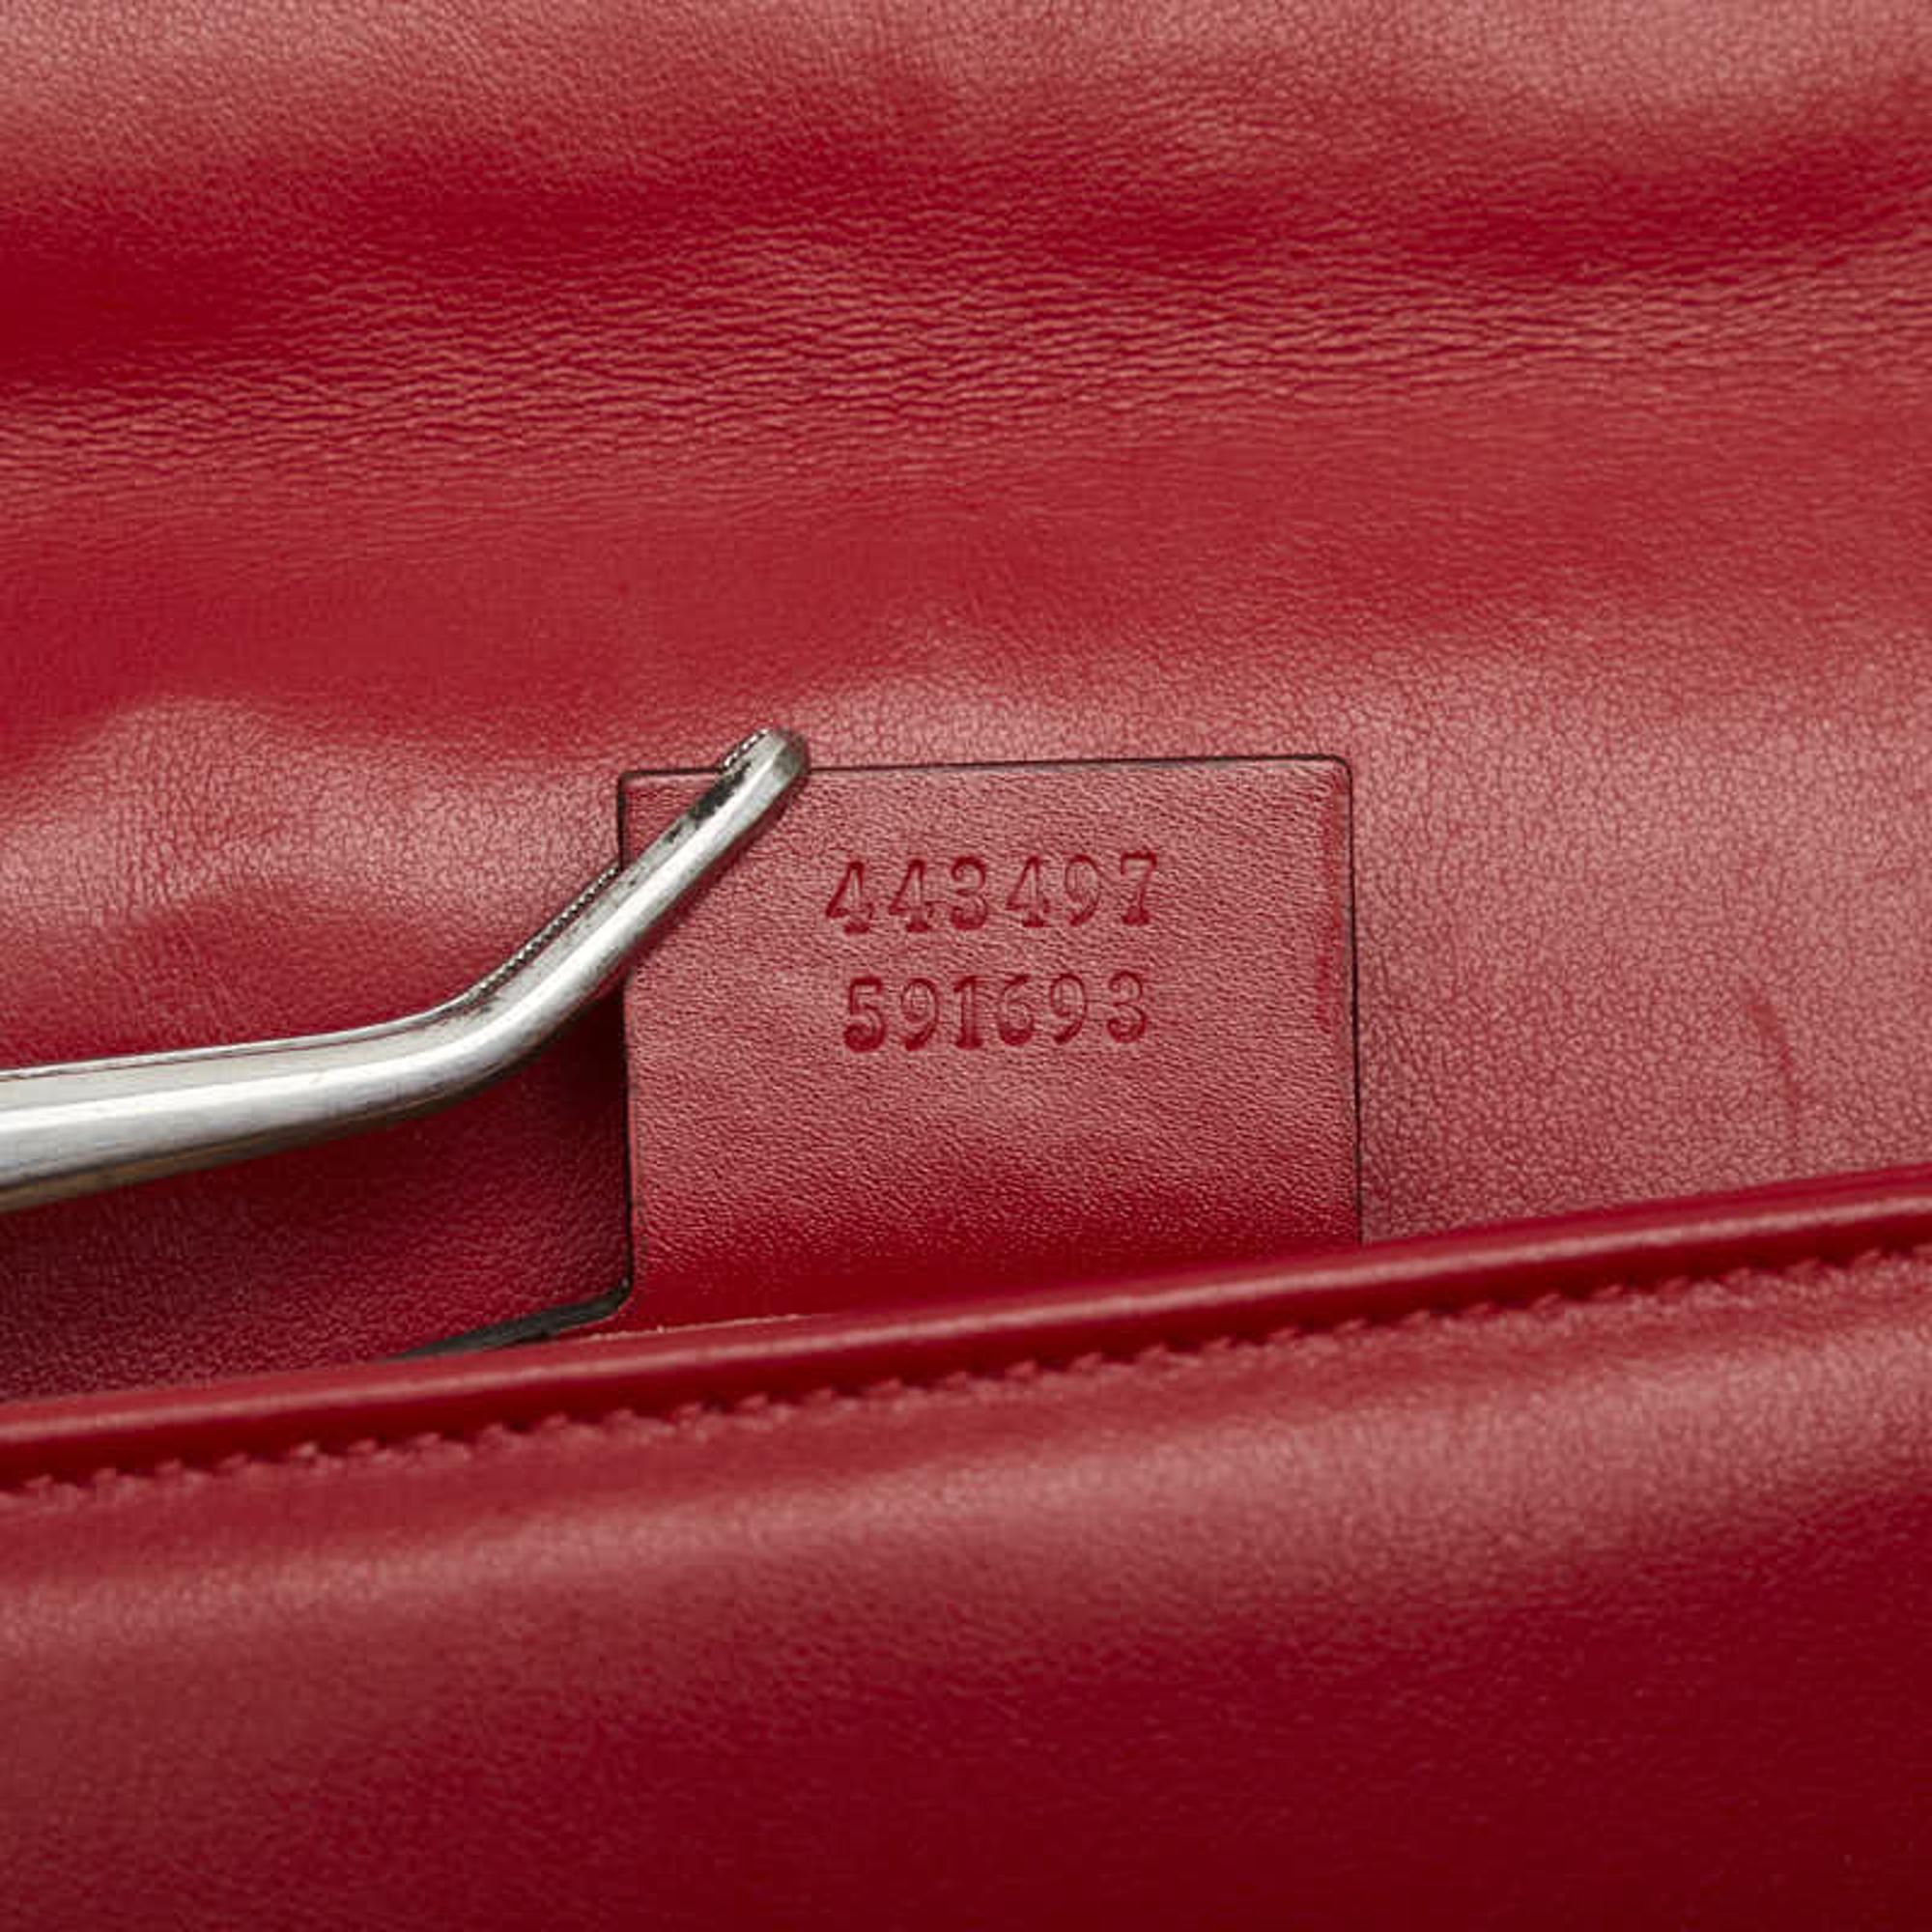 Gucci Red Leather GG Small Marmont Matelasse Shoulder Bag